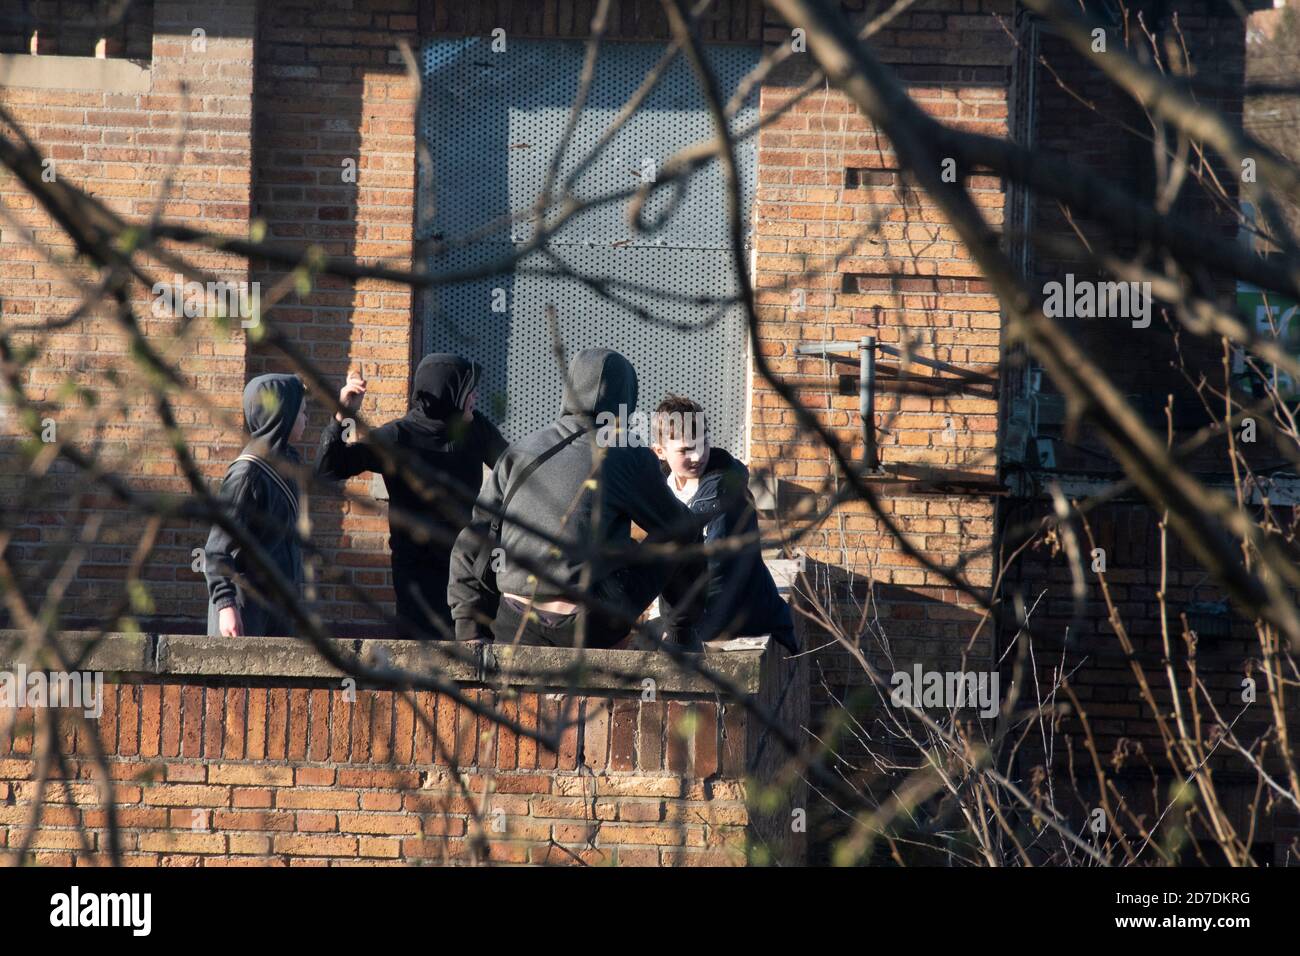 Sheffield, UK - 20 March 2017: A group of teenage boys in hoodies throwing stones from the rooftop terrace of the boarded up Springwood Hotel on Hasti Stock Photo